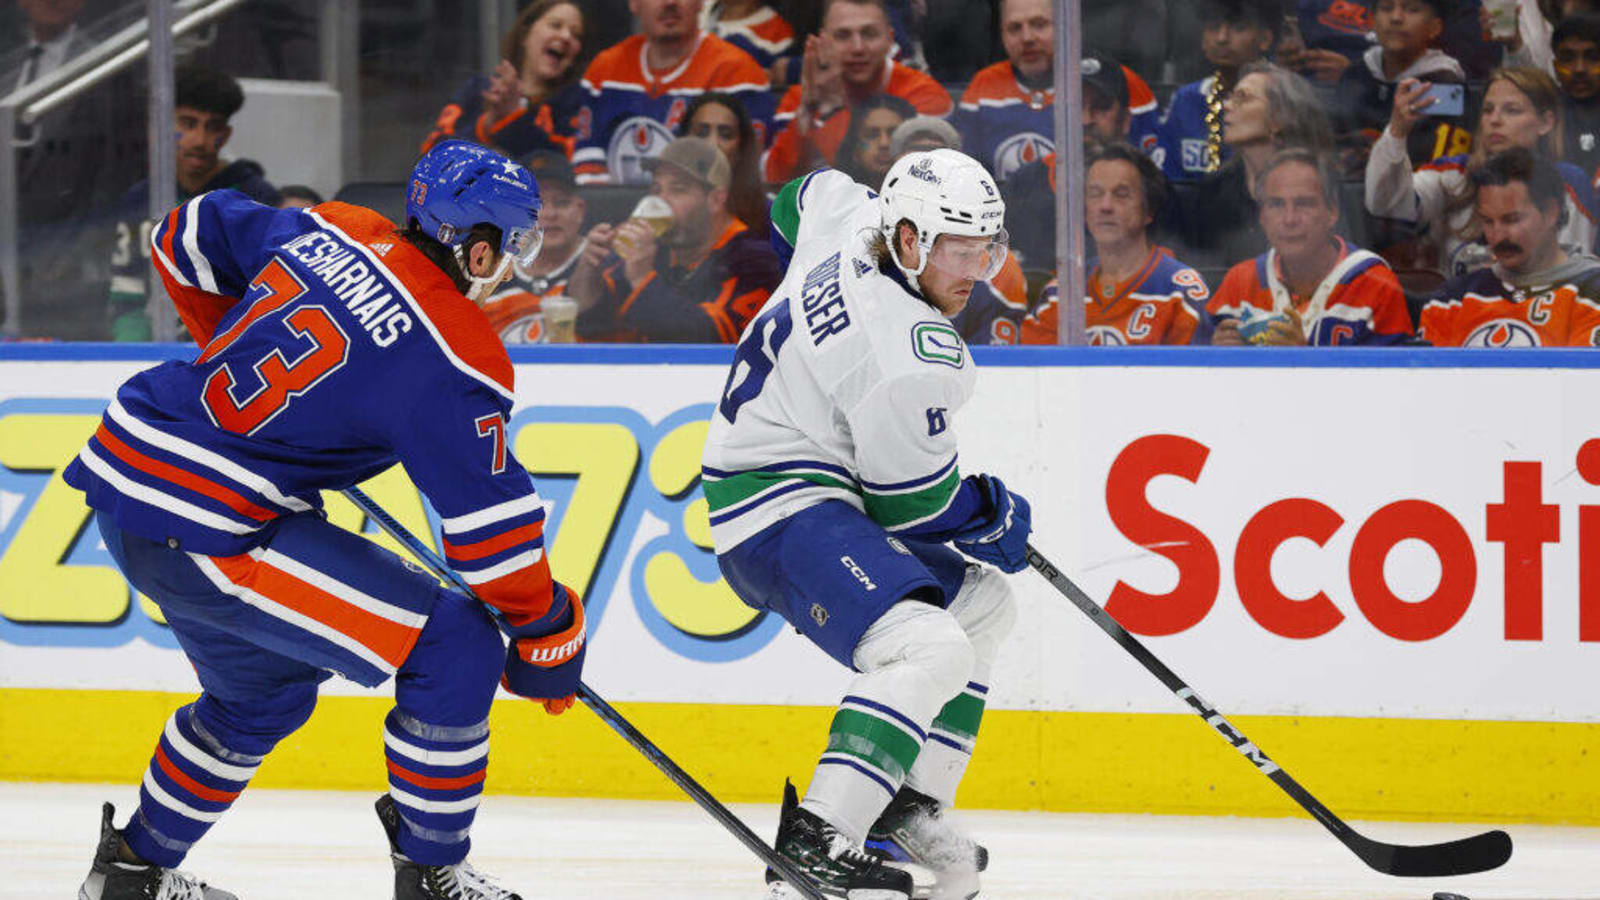 Vancouver Canucks Forward Suffers a Blood Clot Ahead of Game 7 vs the Edmonton Oilers